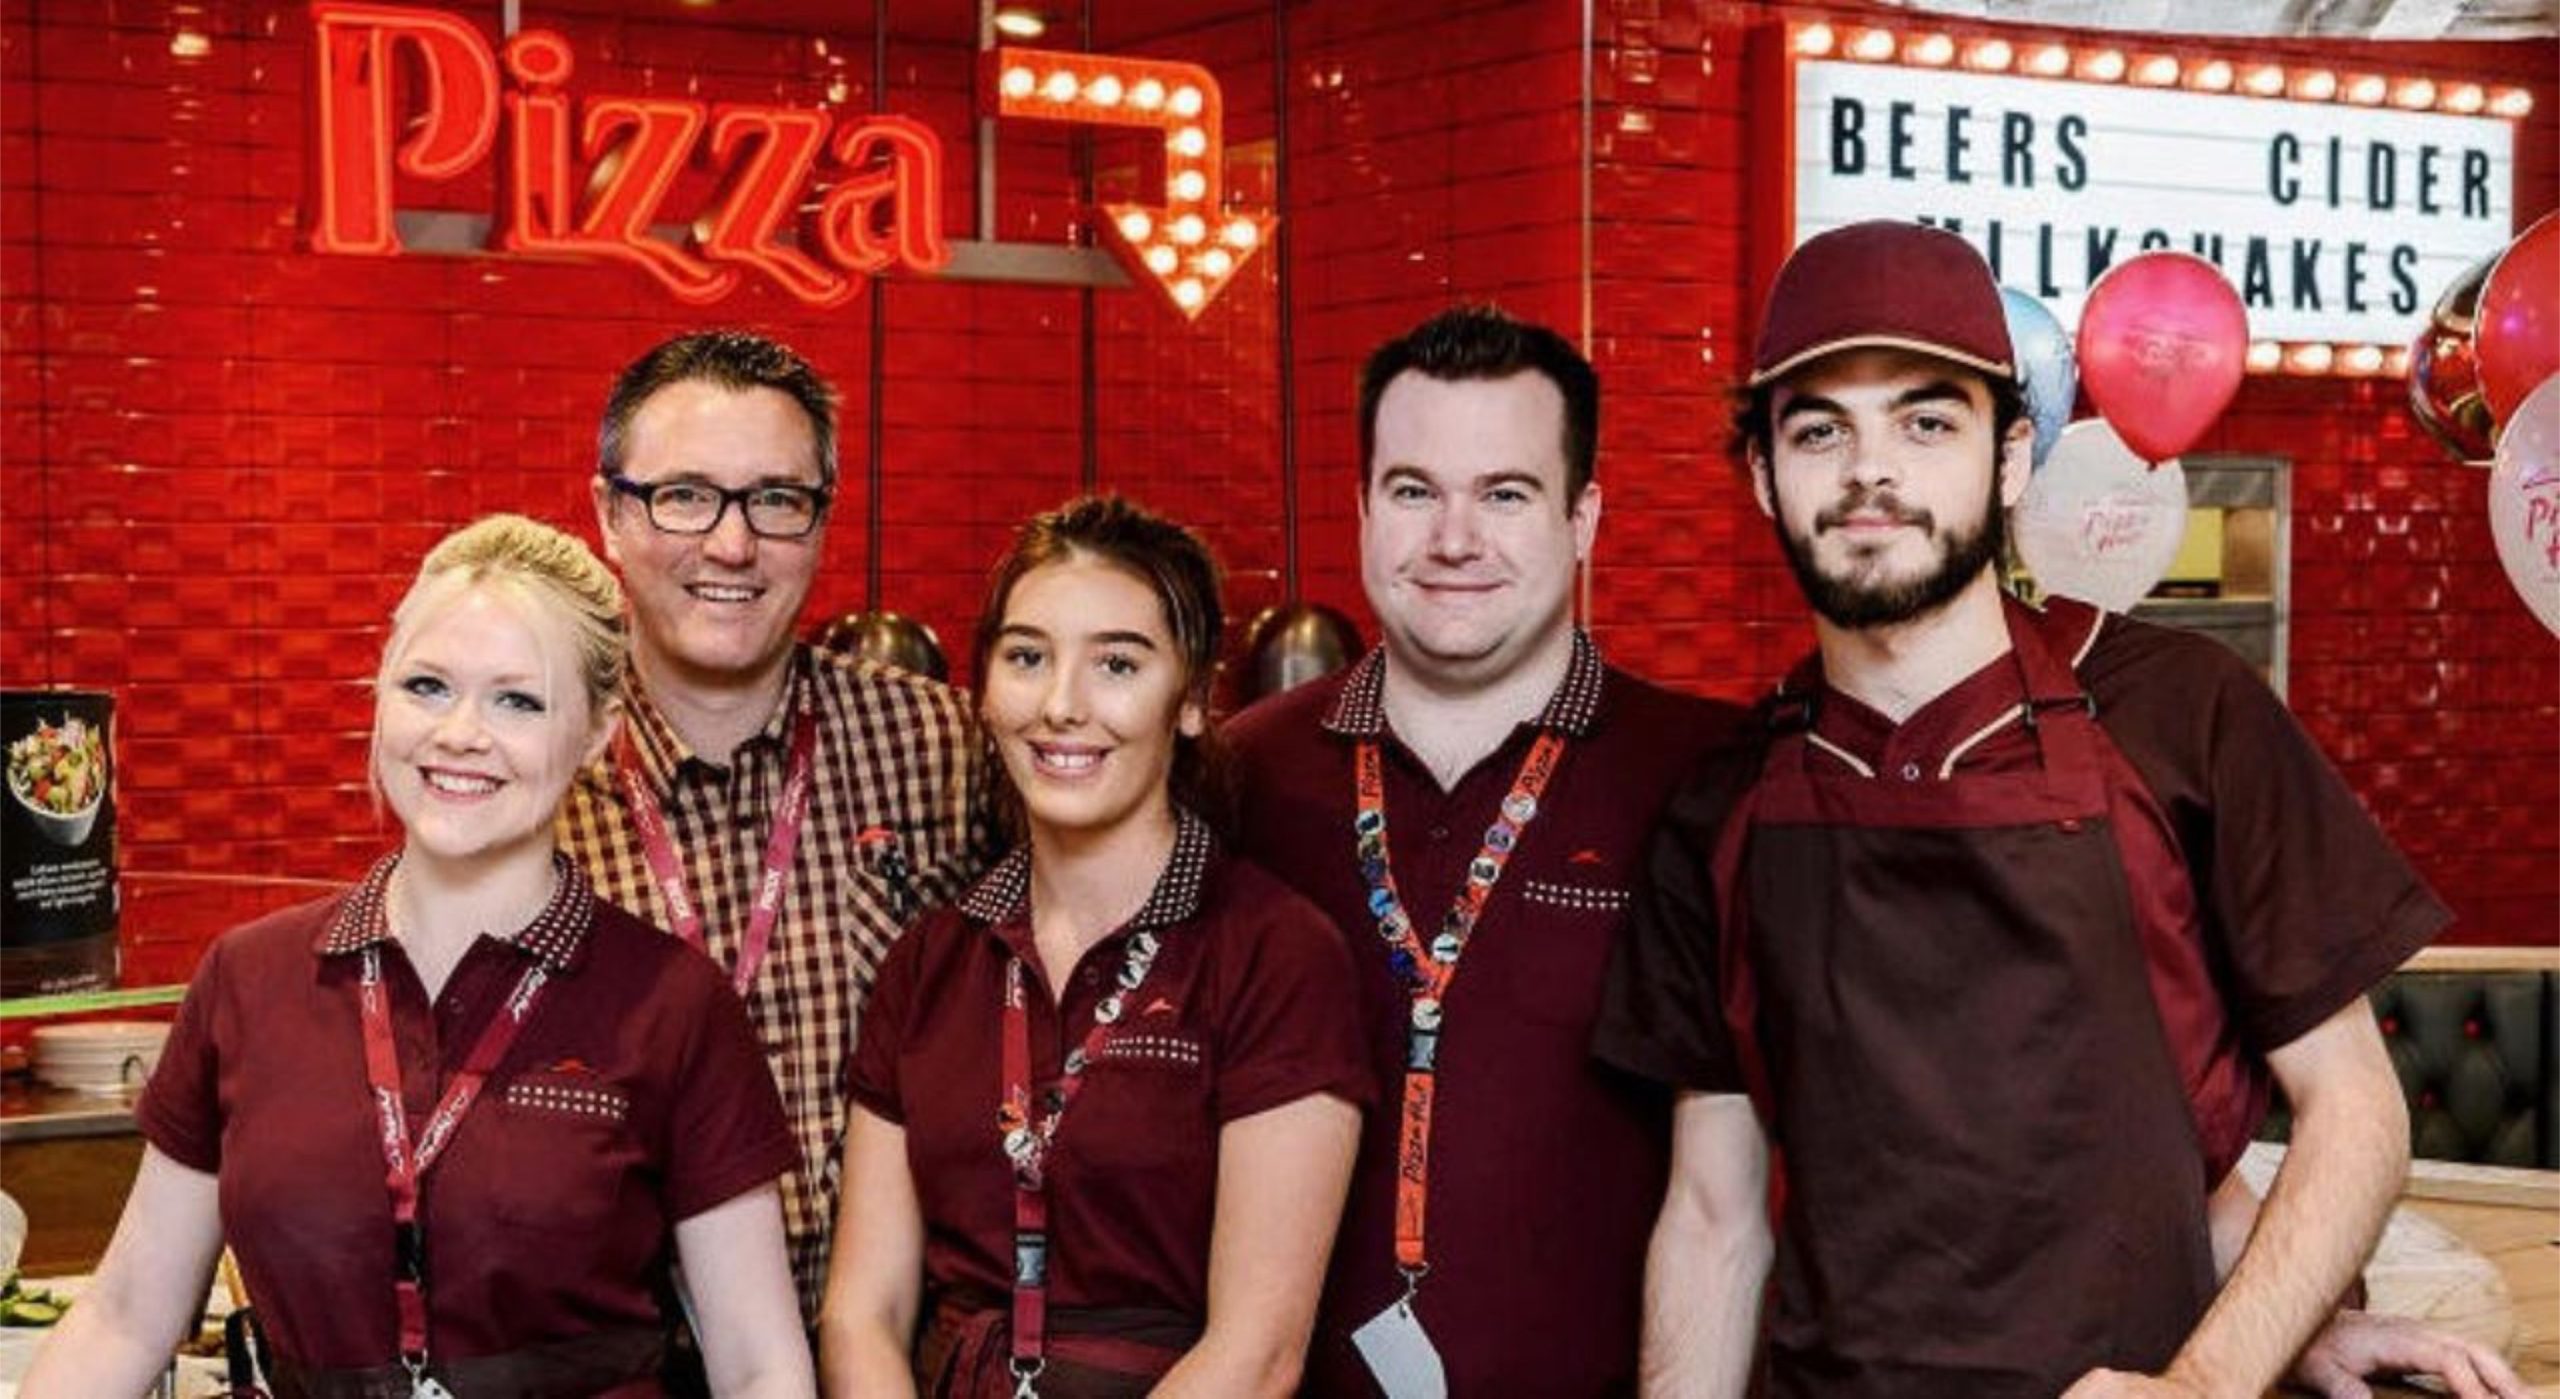 Pizza Hut Canada offers over 2,000 jobs. Check out!